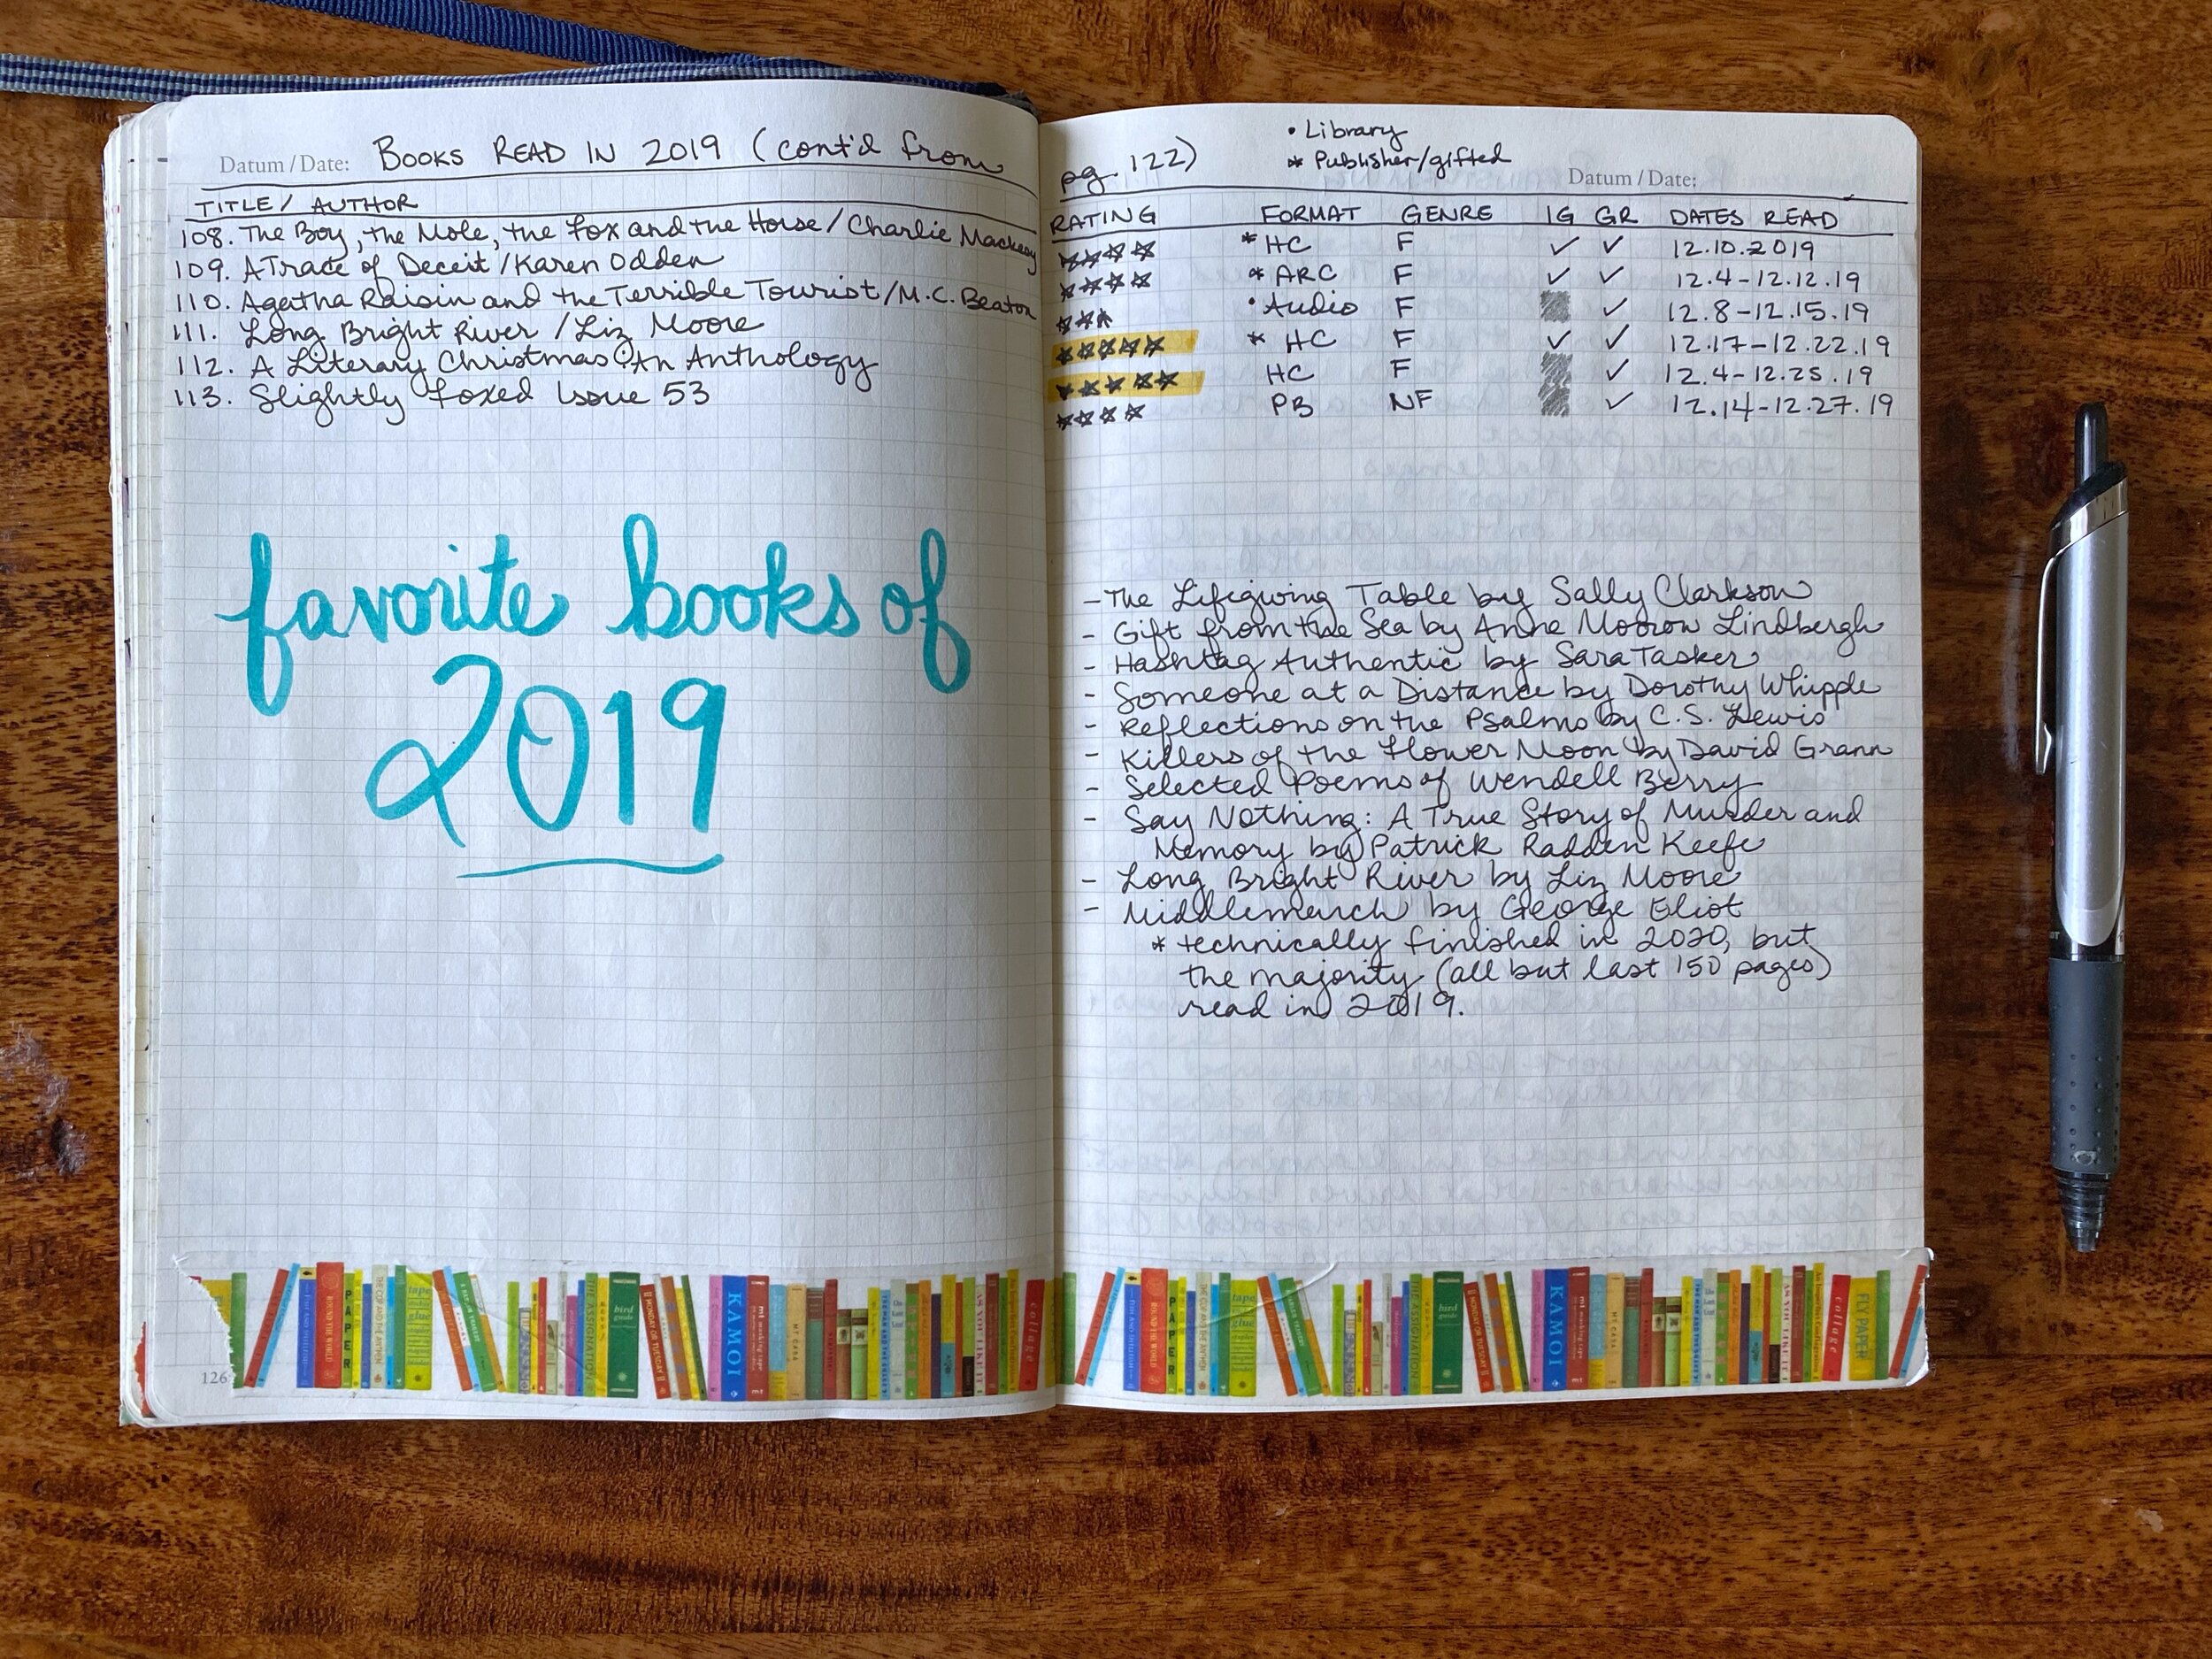 Everything You Wanted to Know About My Book Journal — The Unread Shelf